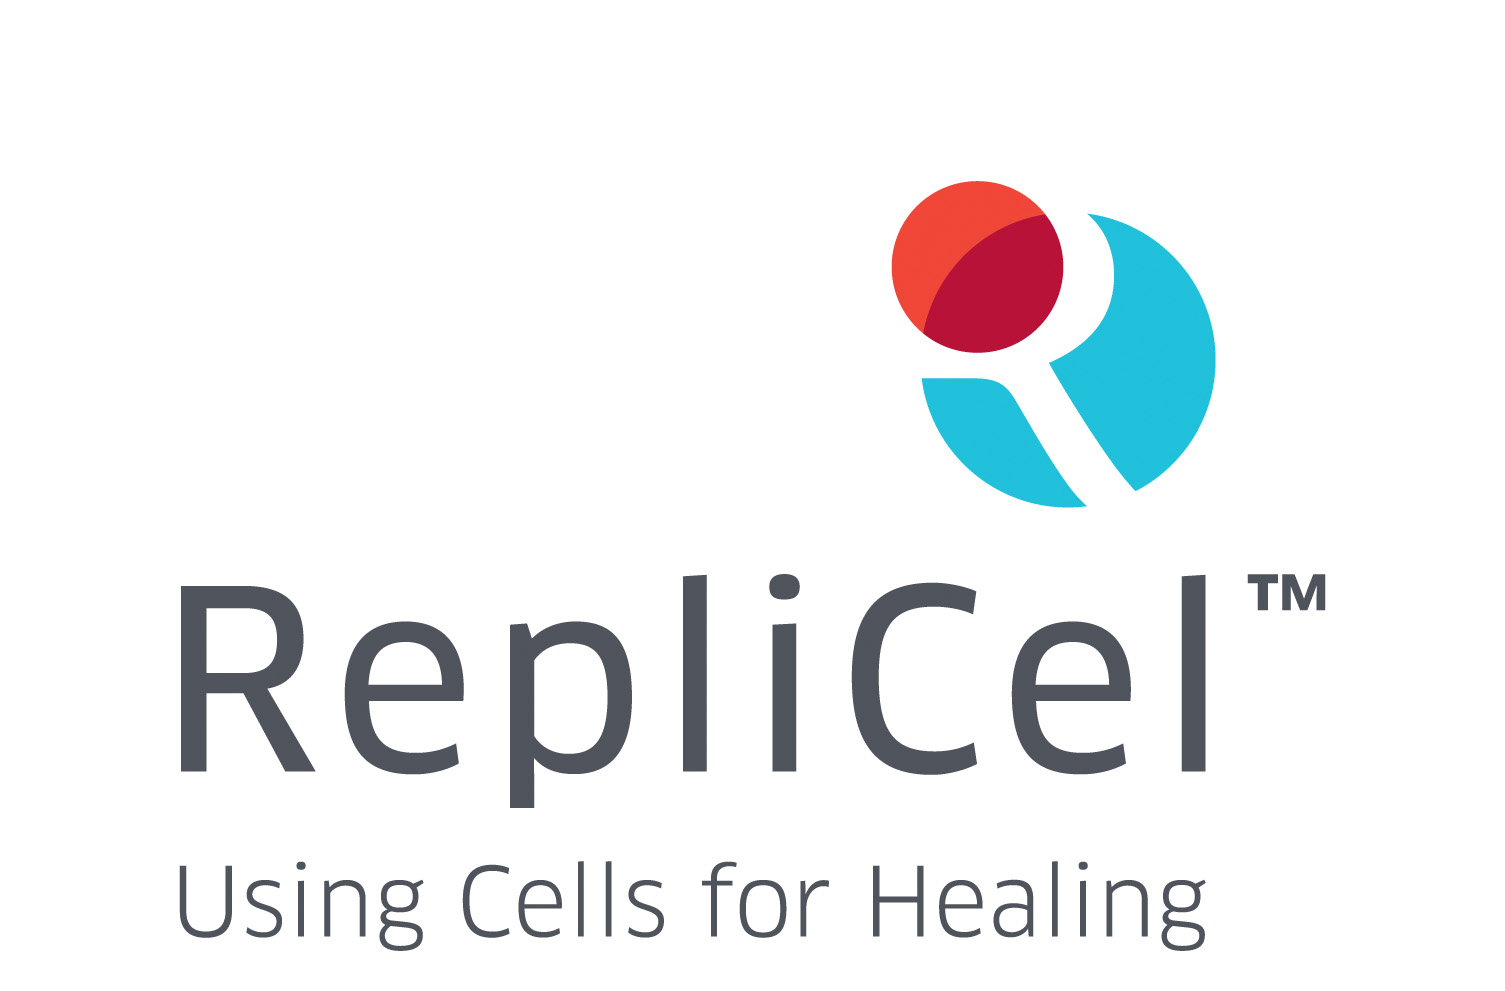 RepliCel Life Sciences, Inc., Tuesday, October 12, 2021, Press release picture